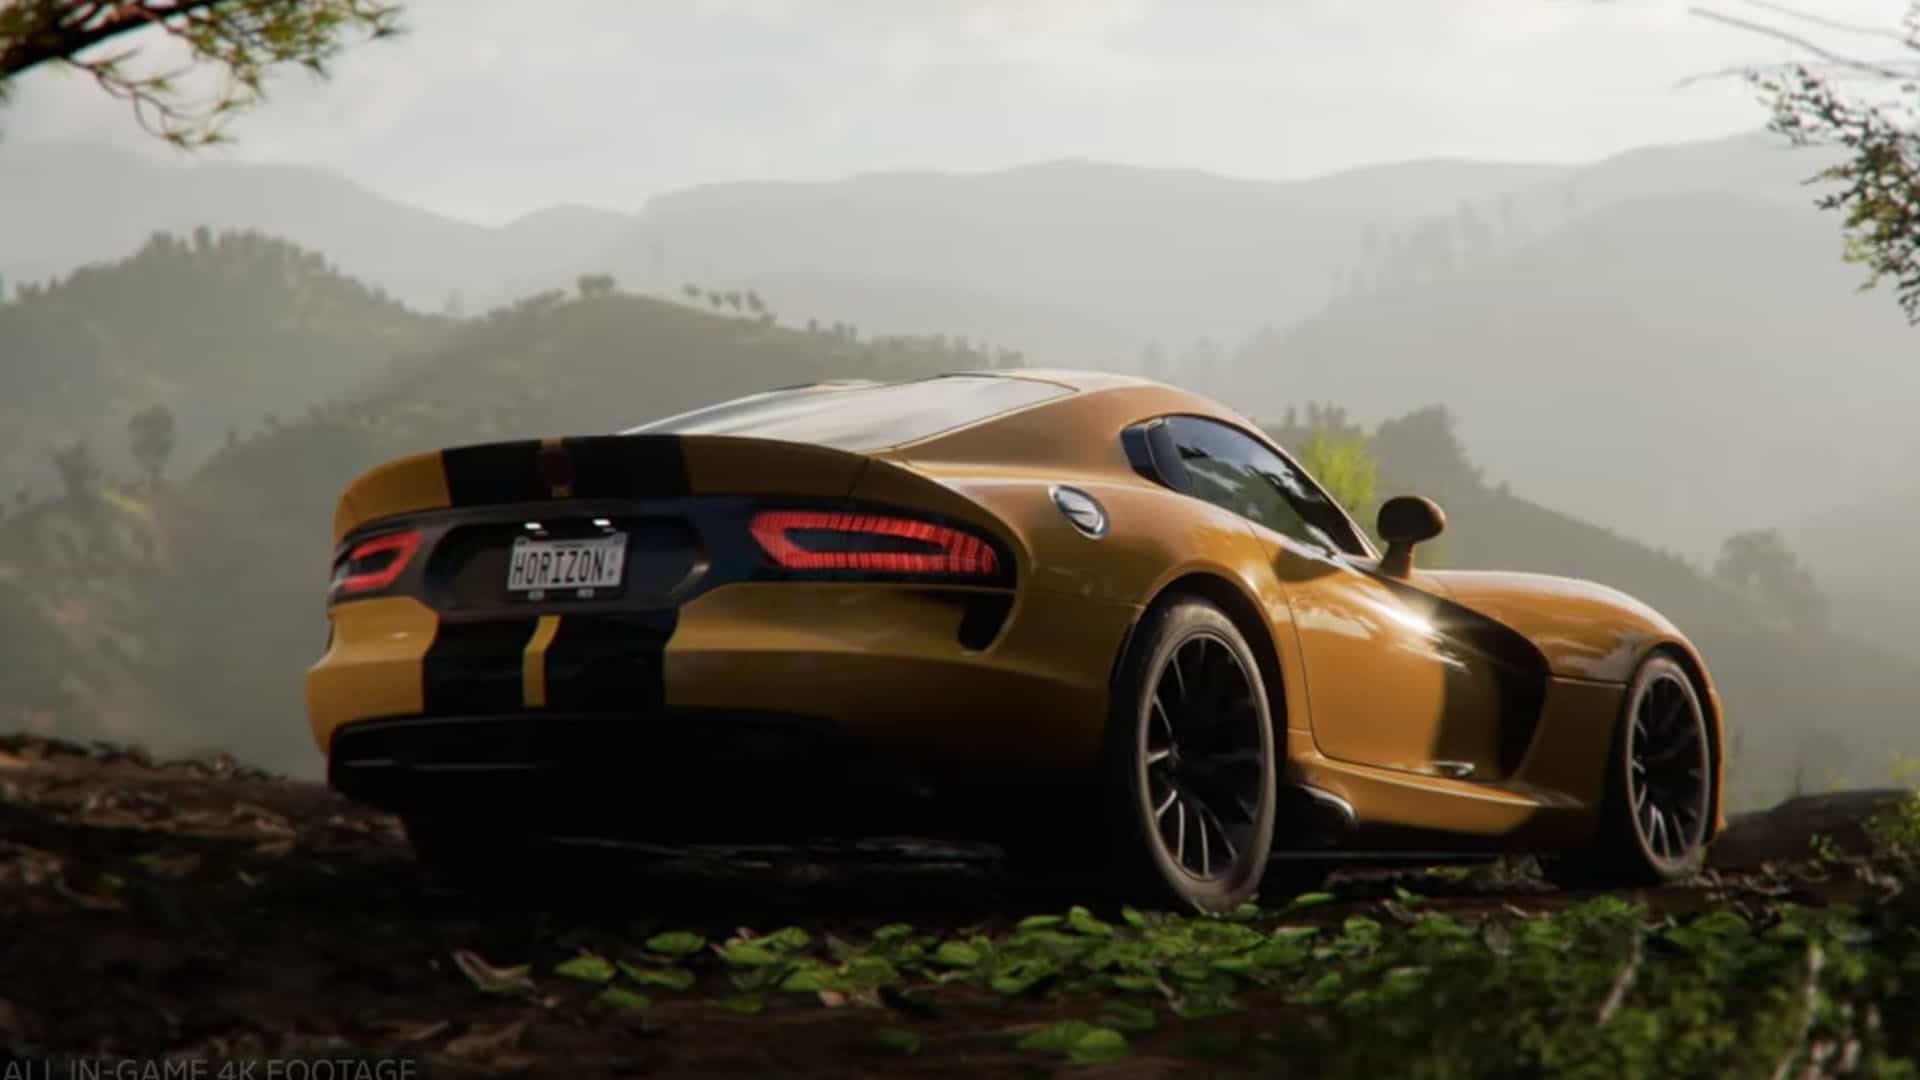 Forza Horizon 5 will celebrate 10 years of the franchise in October